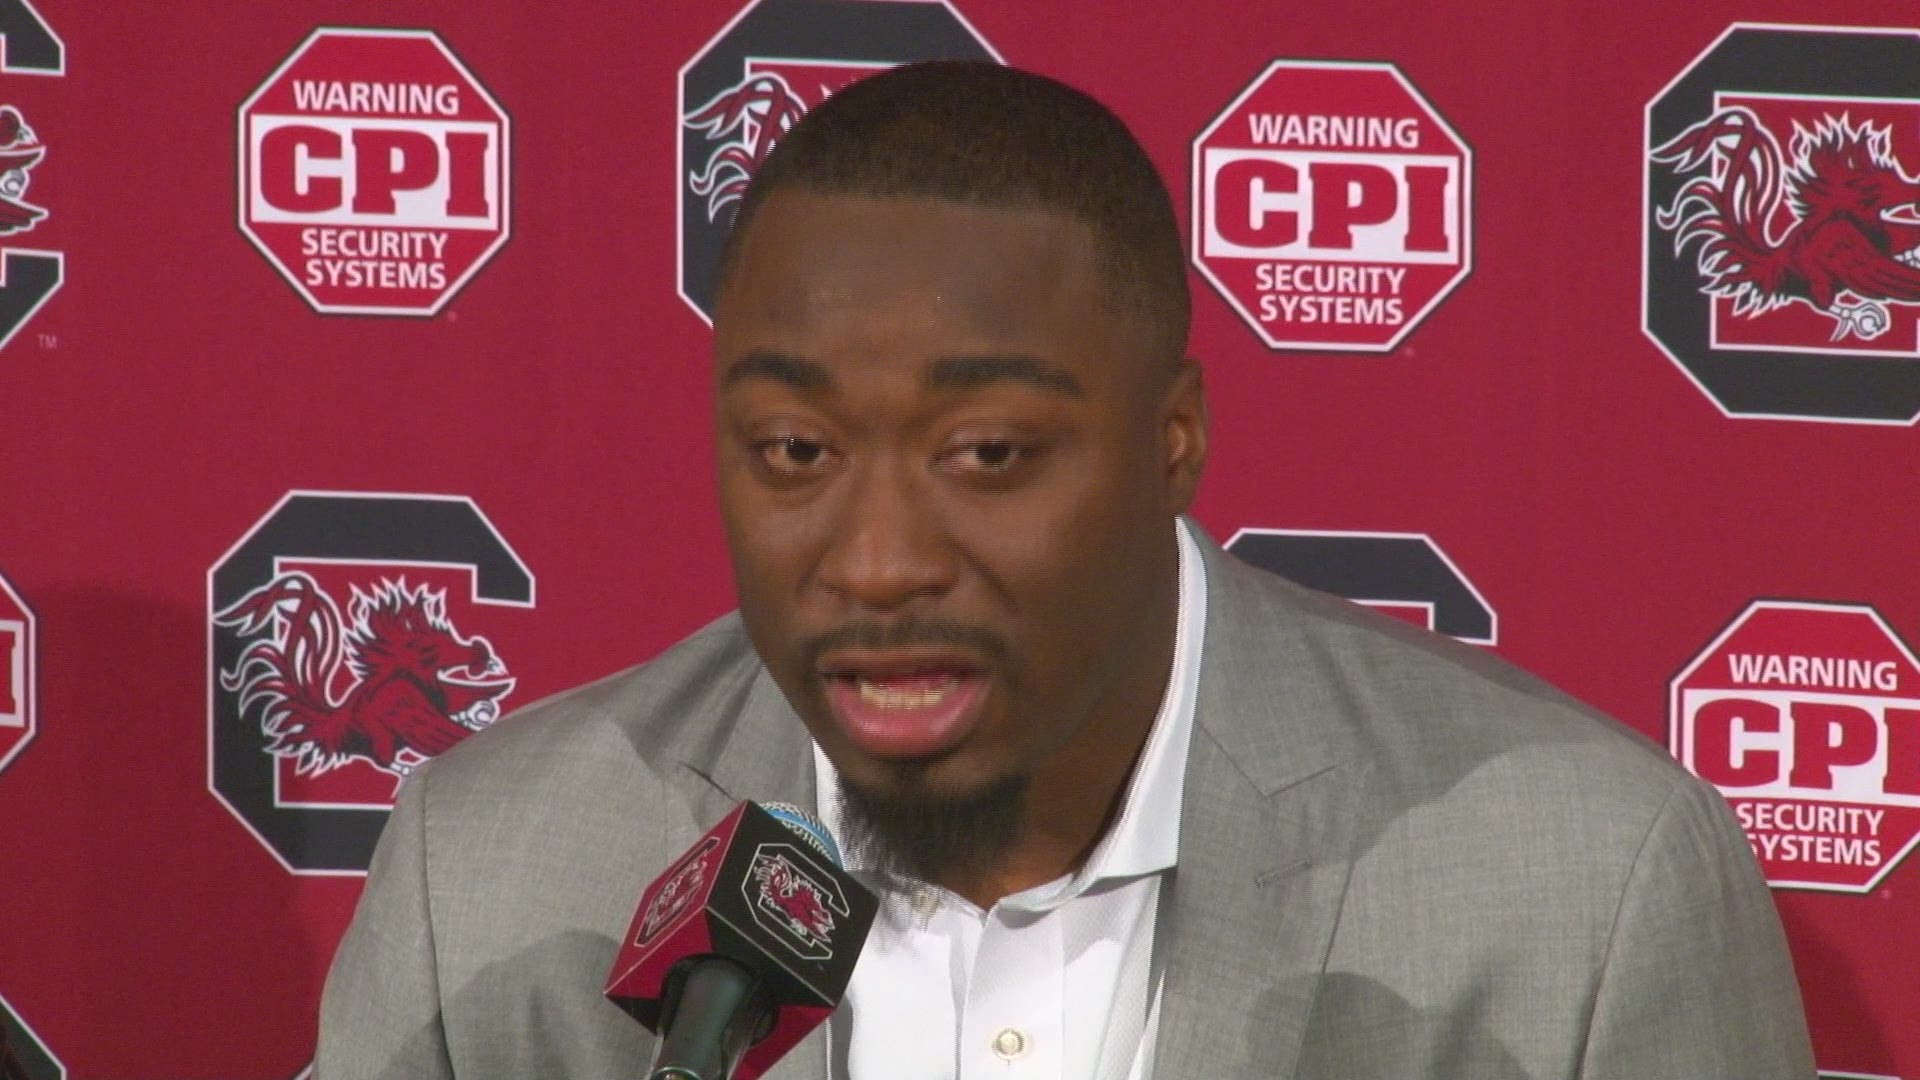 Former Gamecock great Marcus Lattimore is back in the garnet and black but this time he'll be preparing players for life after football. He is the new director of player development and he talks about being back in an official capacity with USC and what h